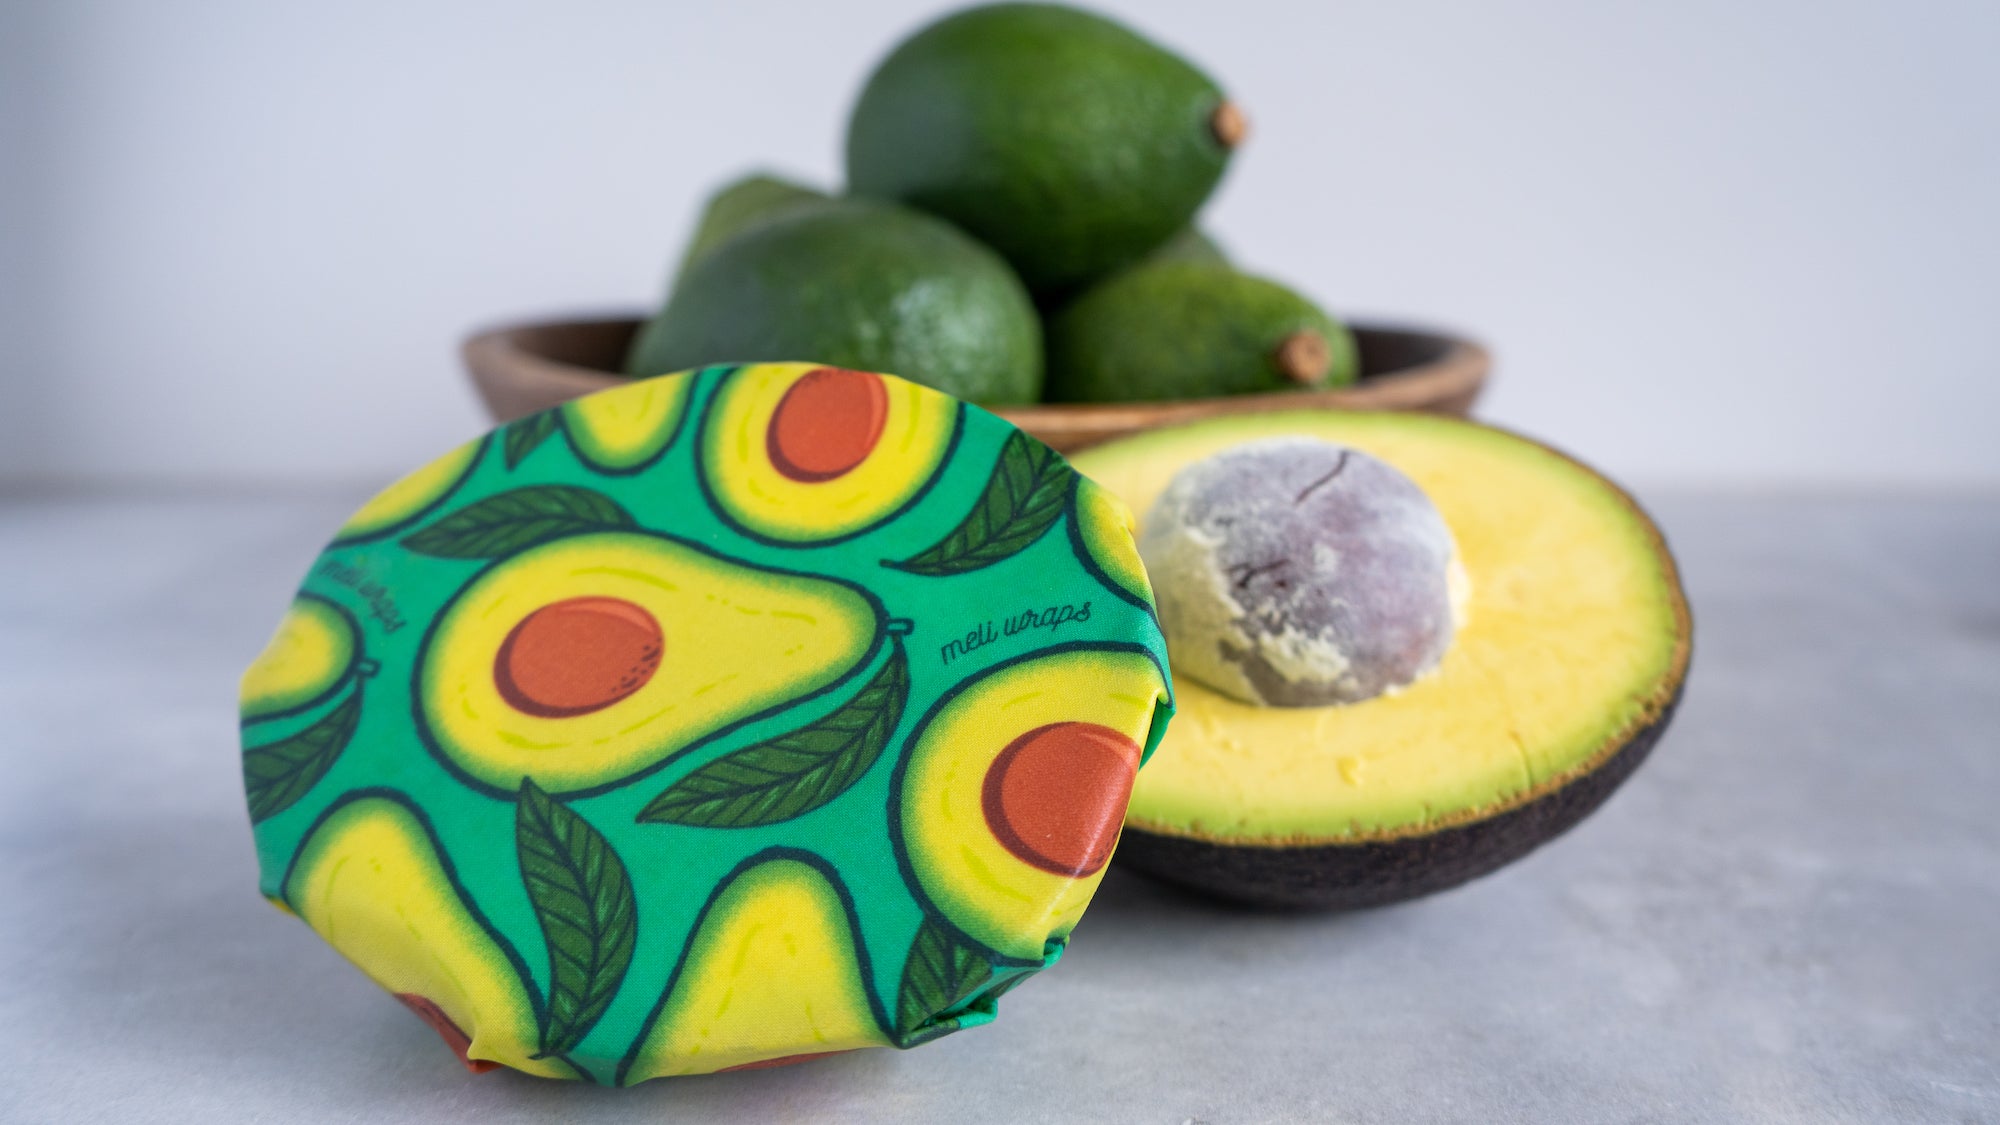 Beeswax Wrap Variety Pack - Fruit Print